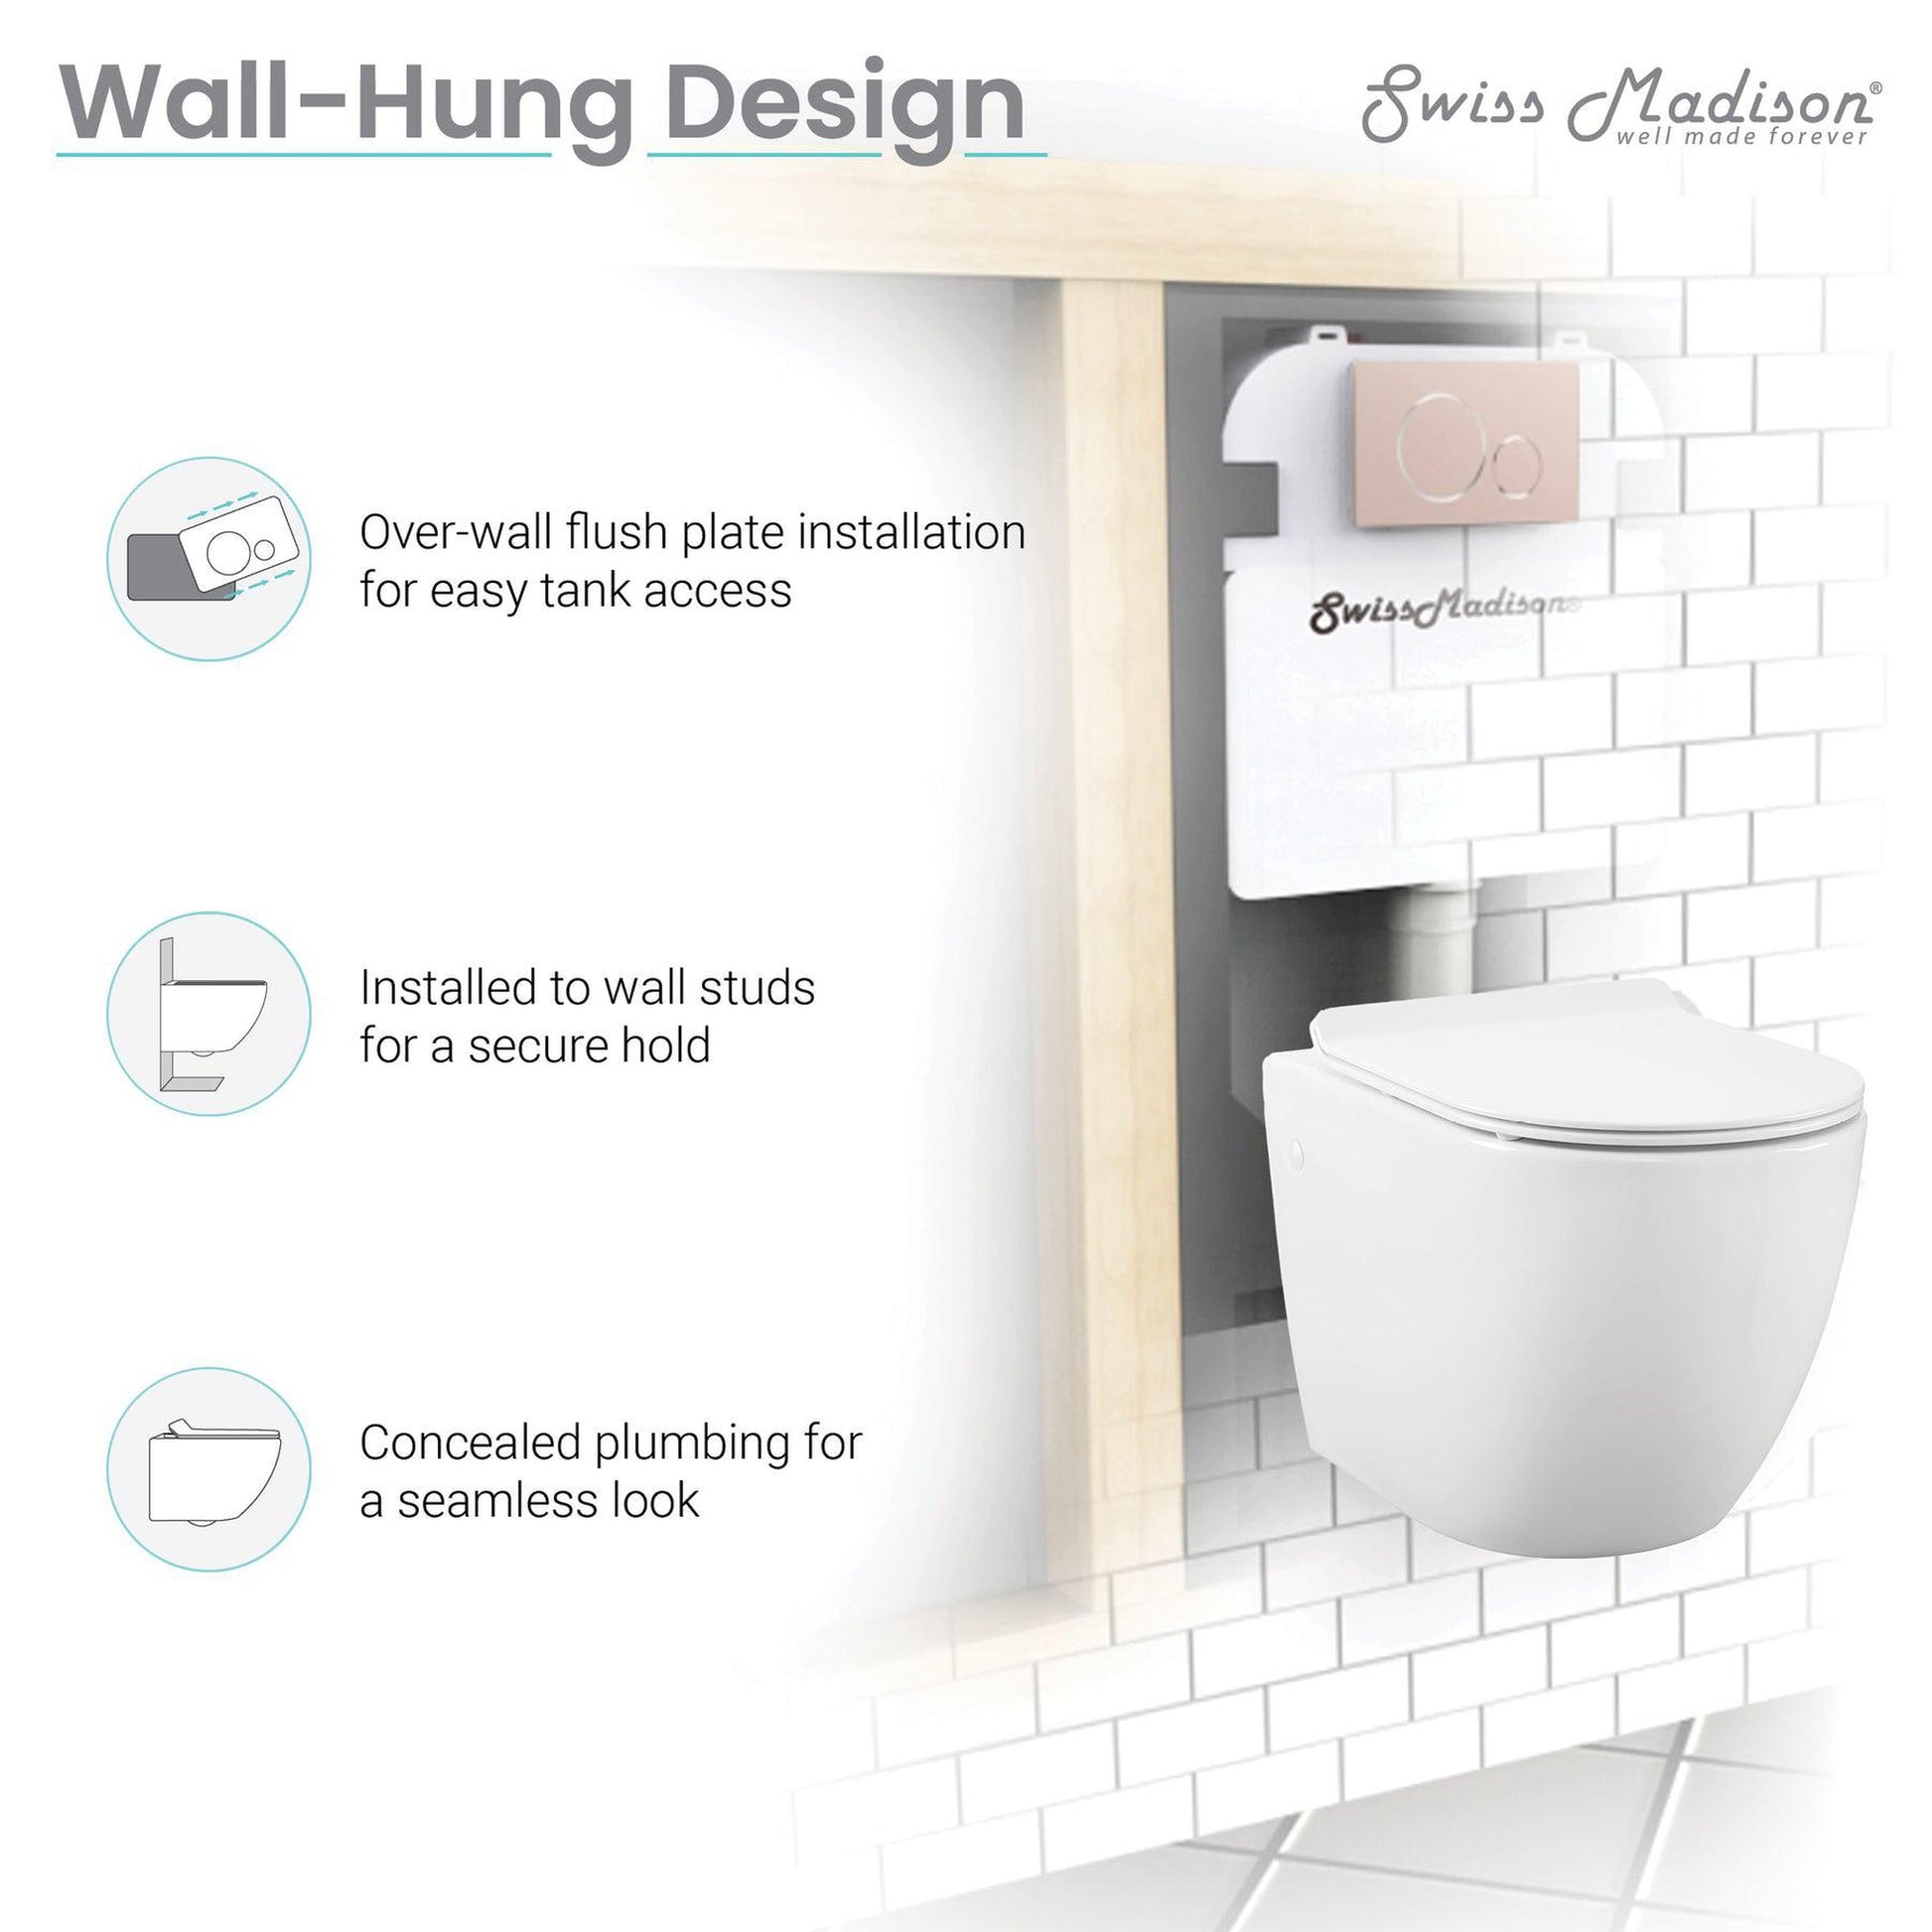 Swiss Madison St. Tropez 14" x 14" Glossy White Elongated Wall-Hung Toilet Bundle With In-Wall Carrier Tank and 0.8/1.6 GPF Dual-Flush Large Wall Actuator Plate